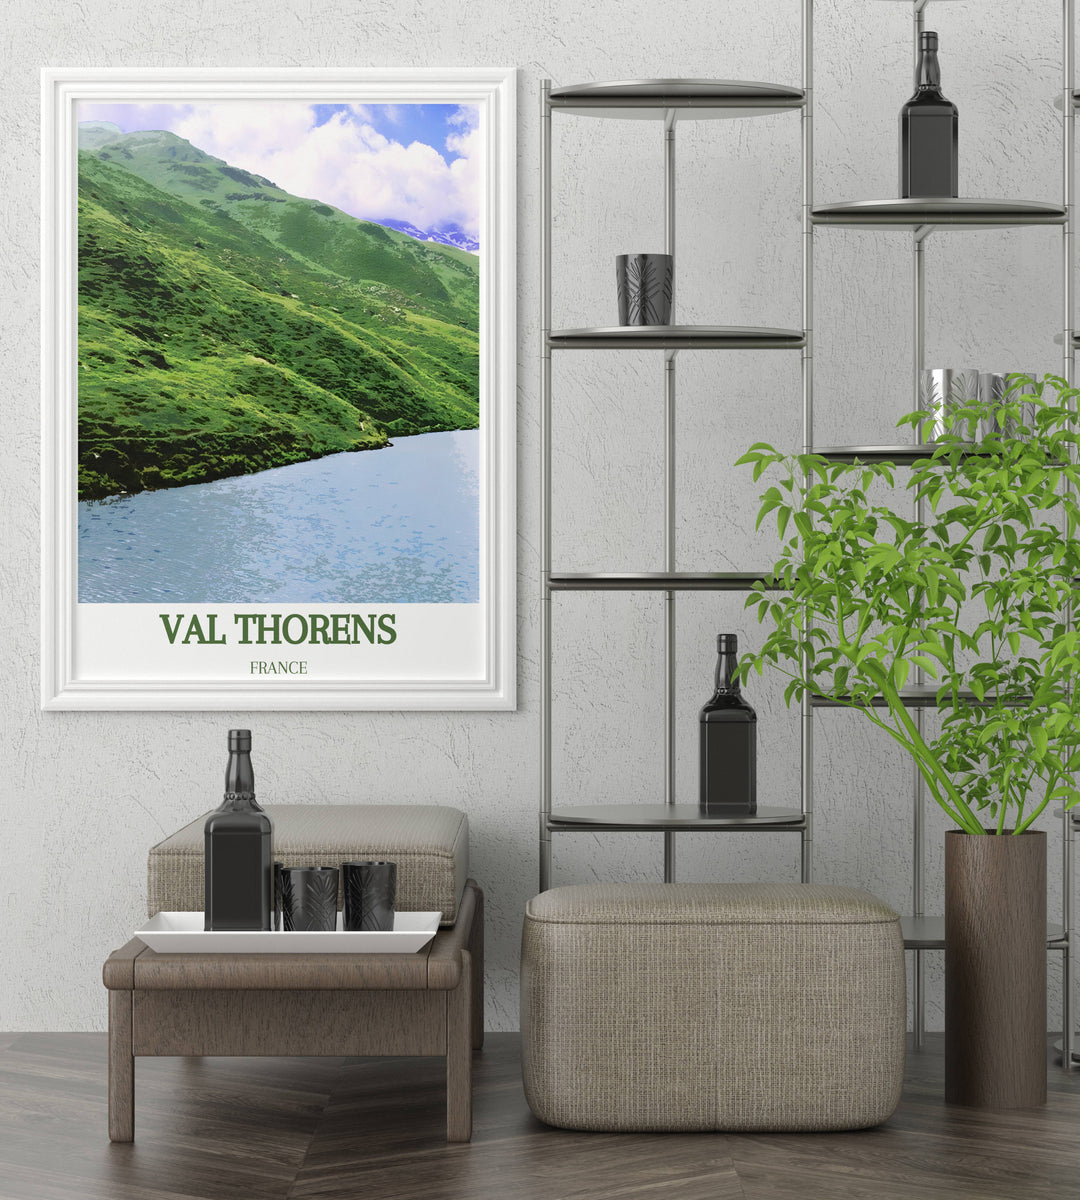 Lac du Lou custom print capturing the picturesque beauty of the lake and surrounding mountains in Val Thorens, ideal for winter sports enthusiasts and nature lovers. Perfect for decorating your home or office.